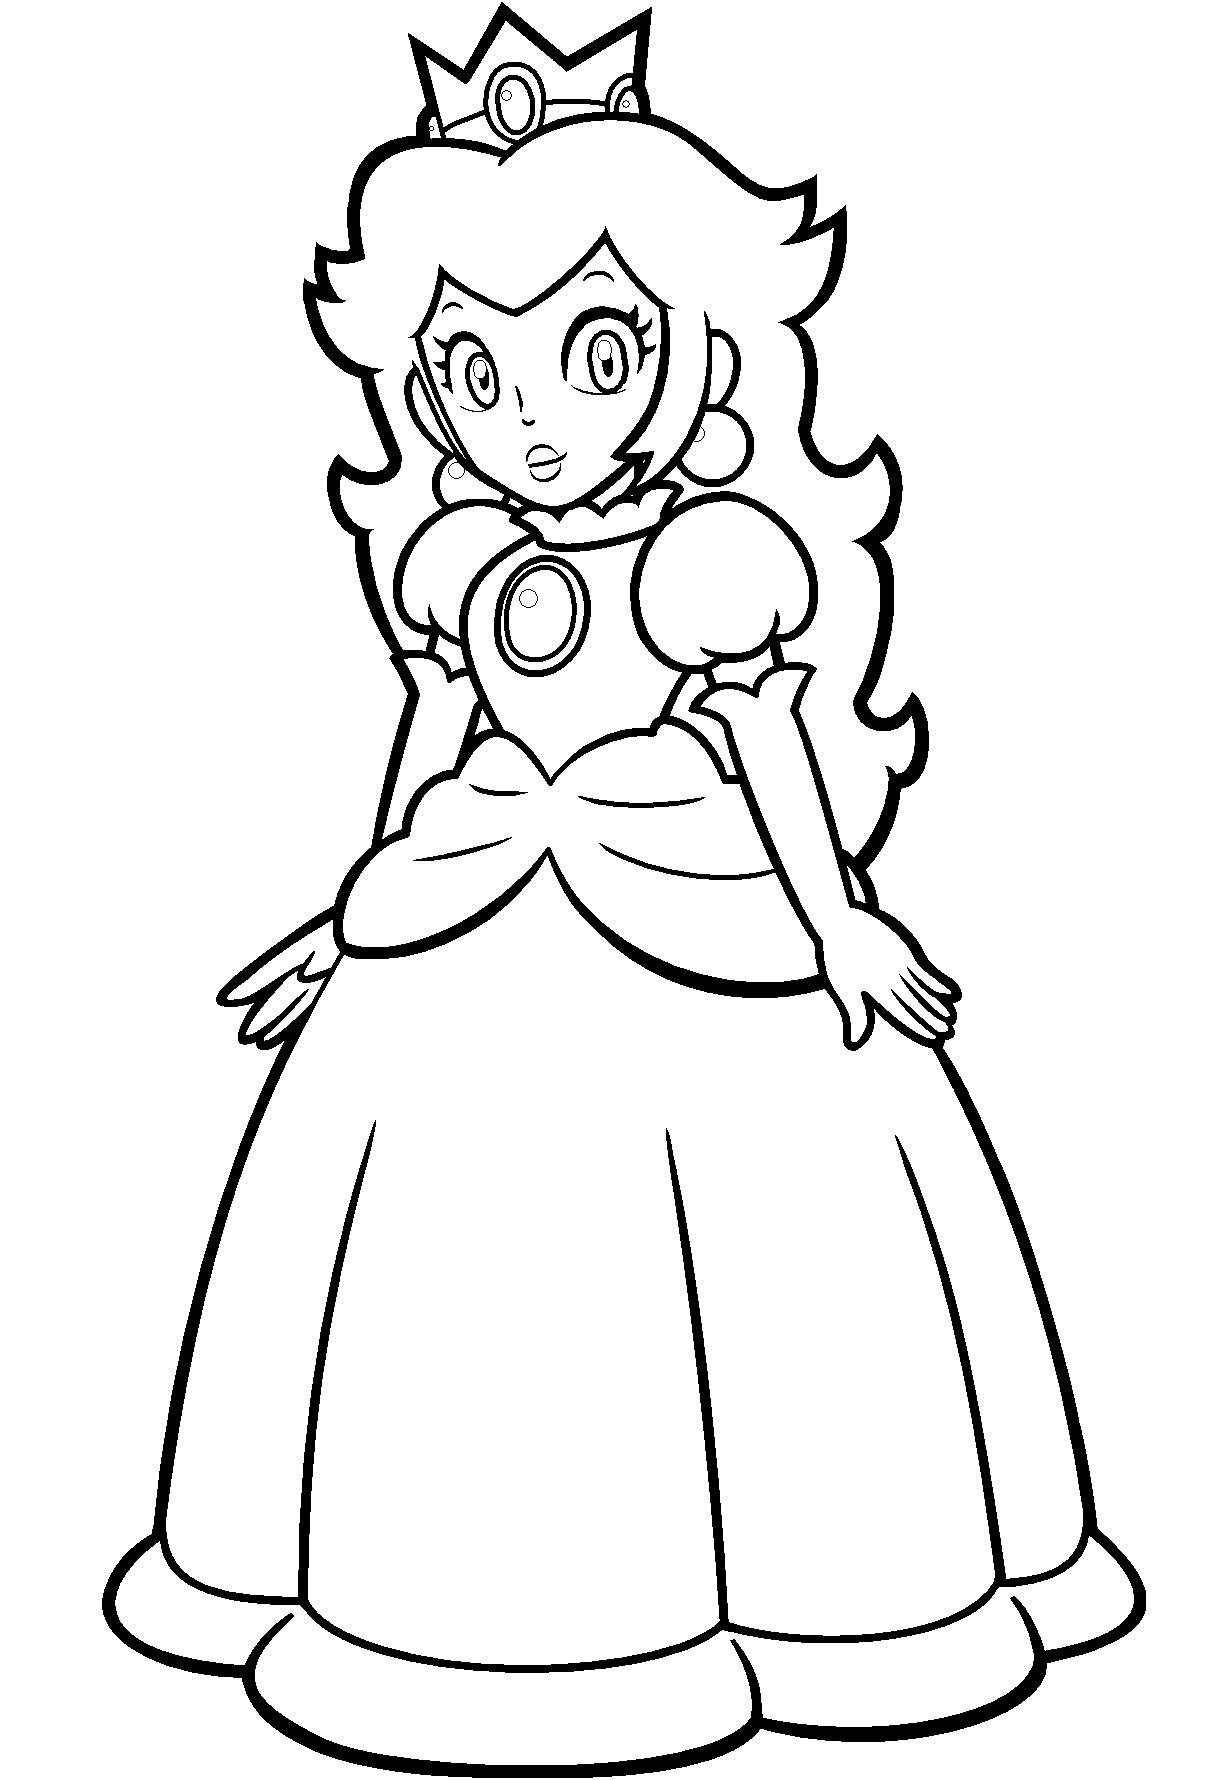 Beautiful Princess Peach from Super Mario Games Coloring Pages